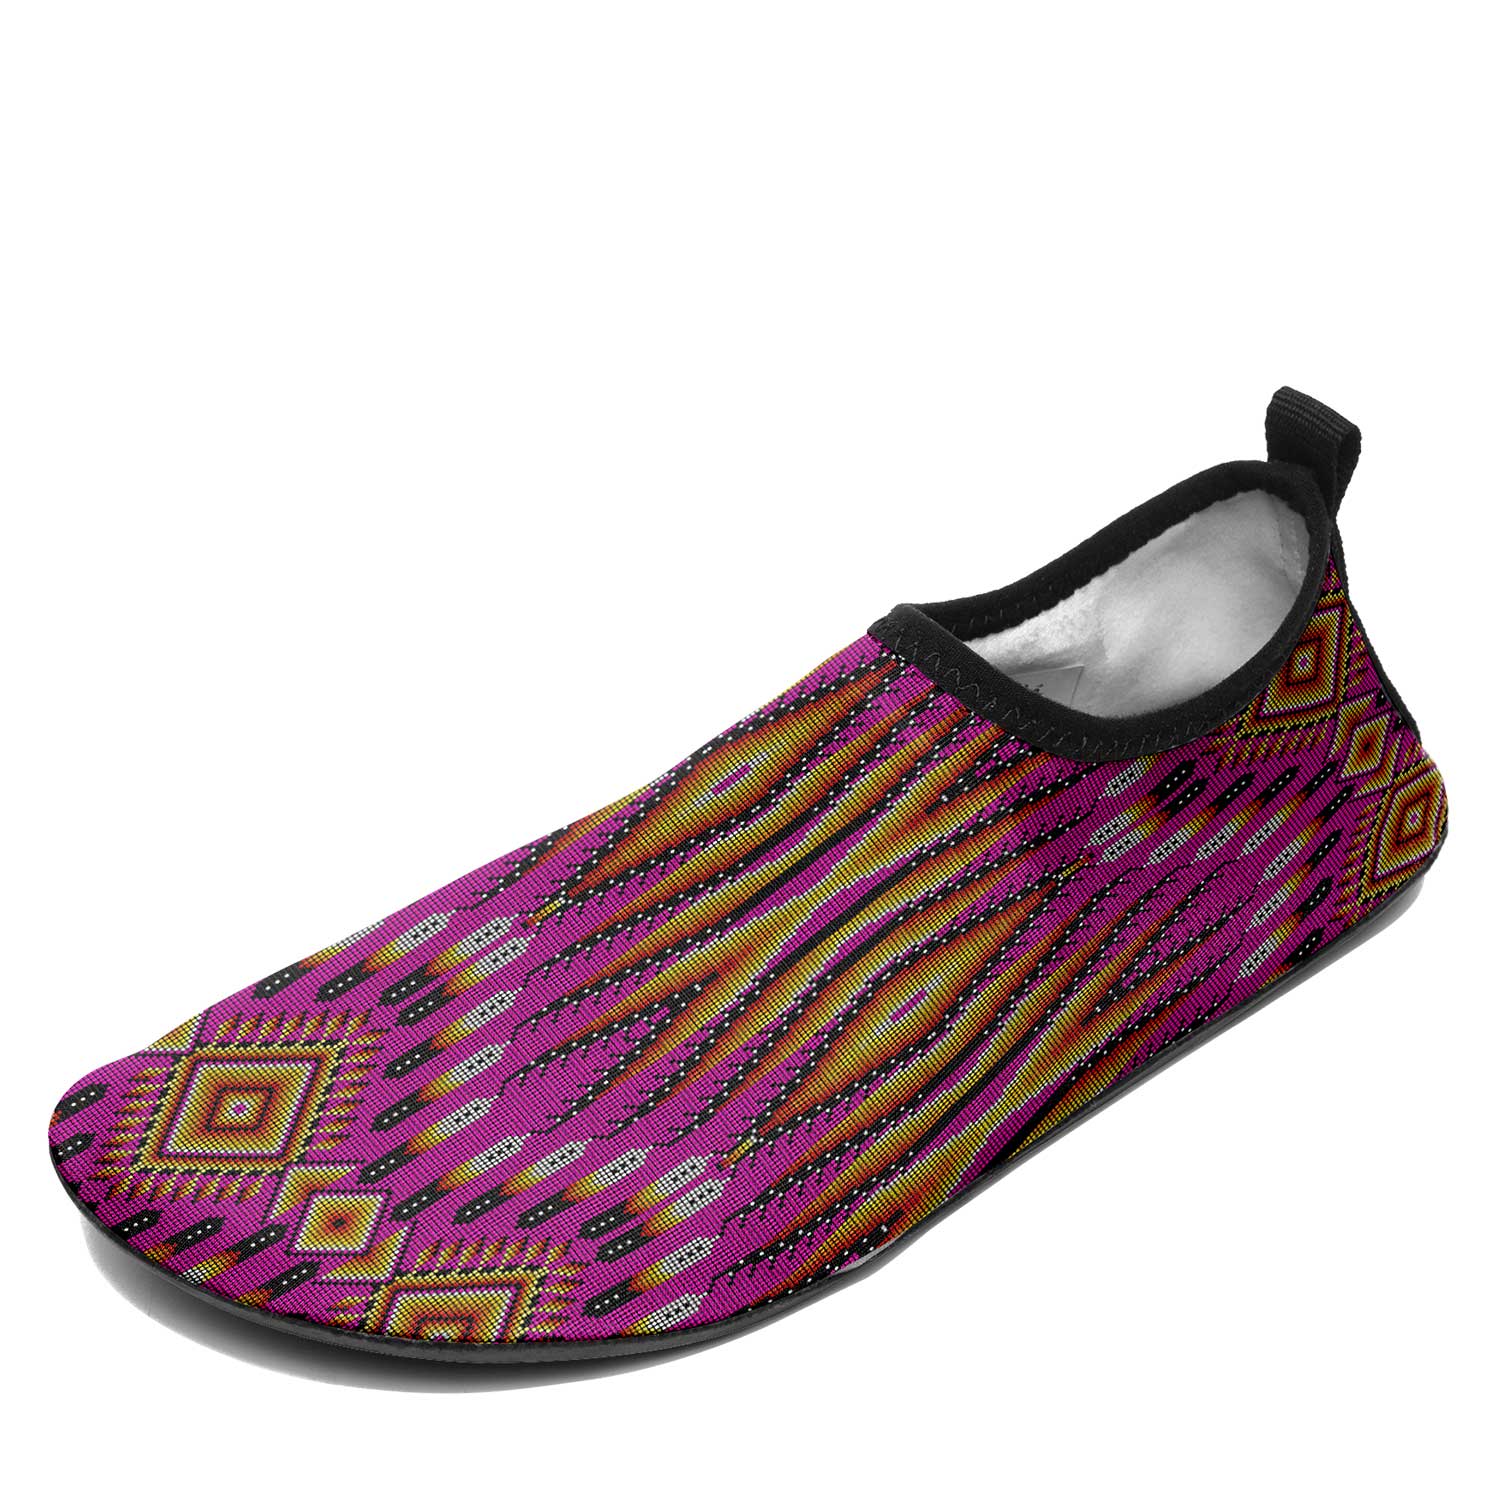 Fire Feather Pink Kid's Sockamoccs Slip On Shoes